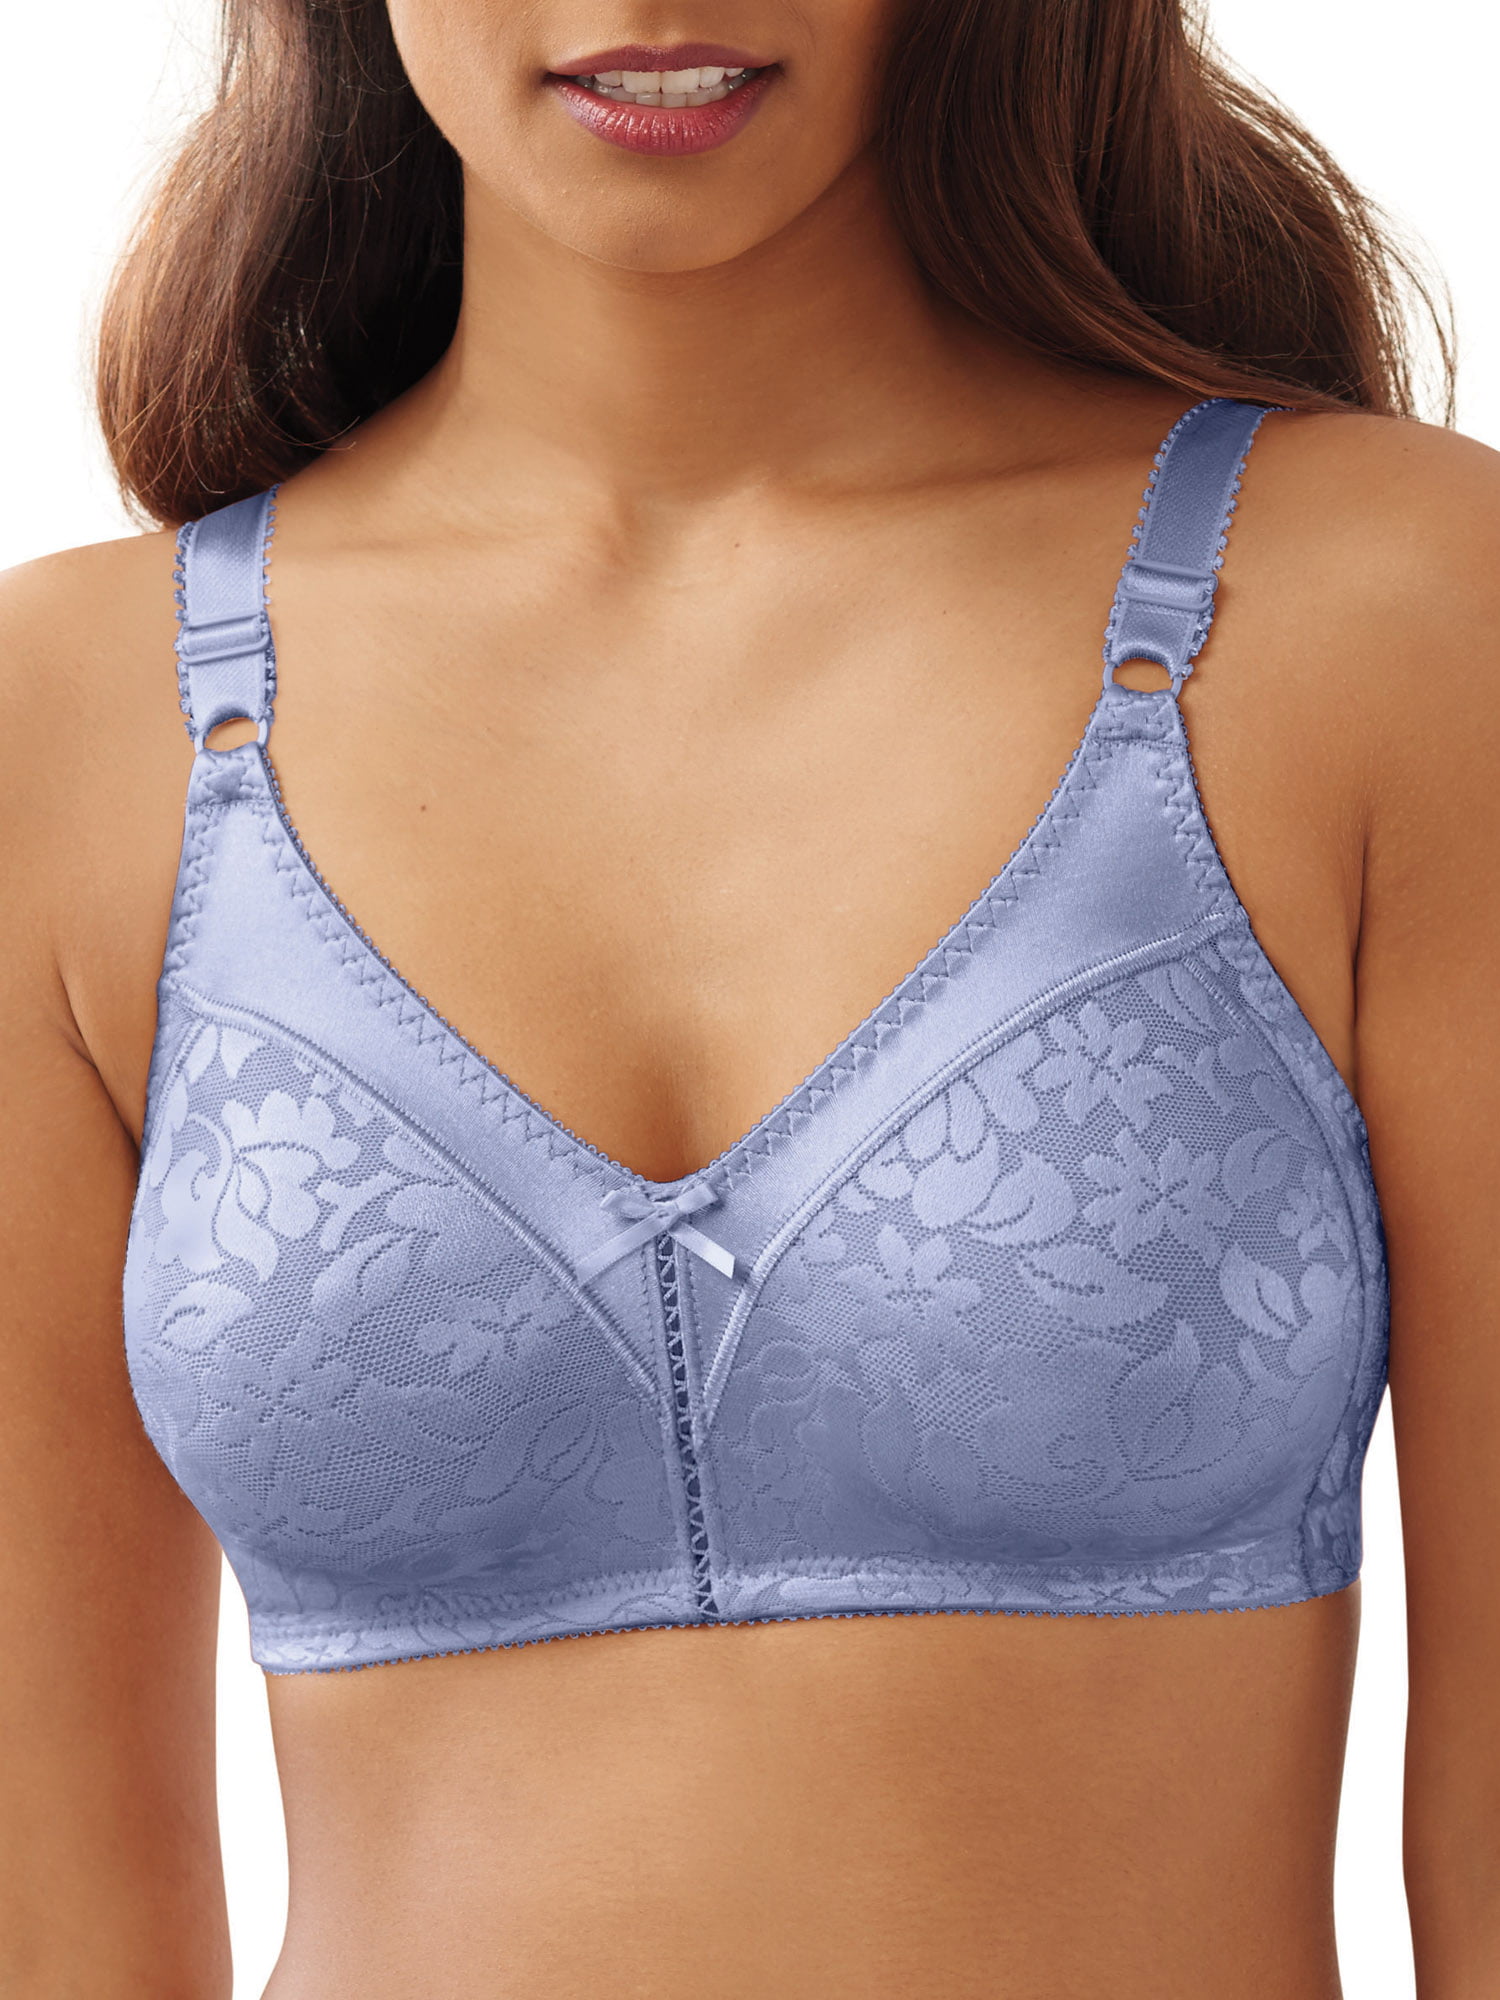 Women's Double Support Lace Wirefree Bra, Style 3372 